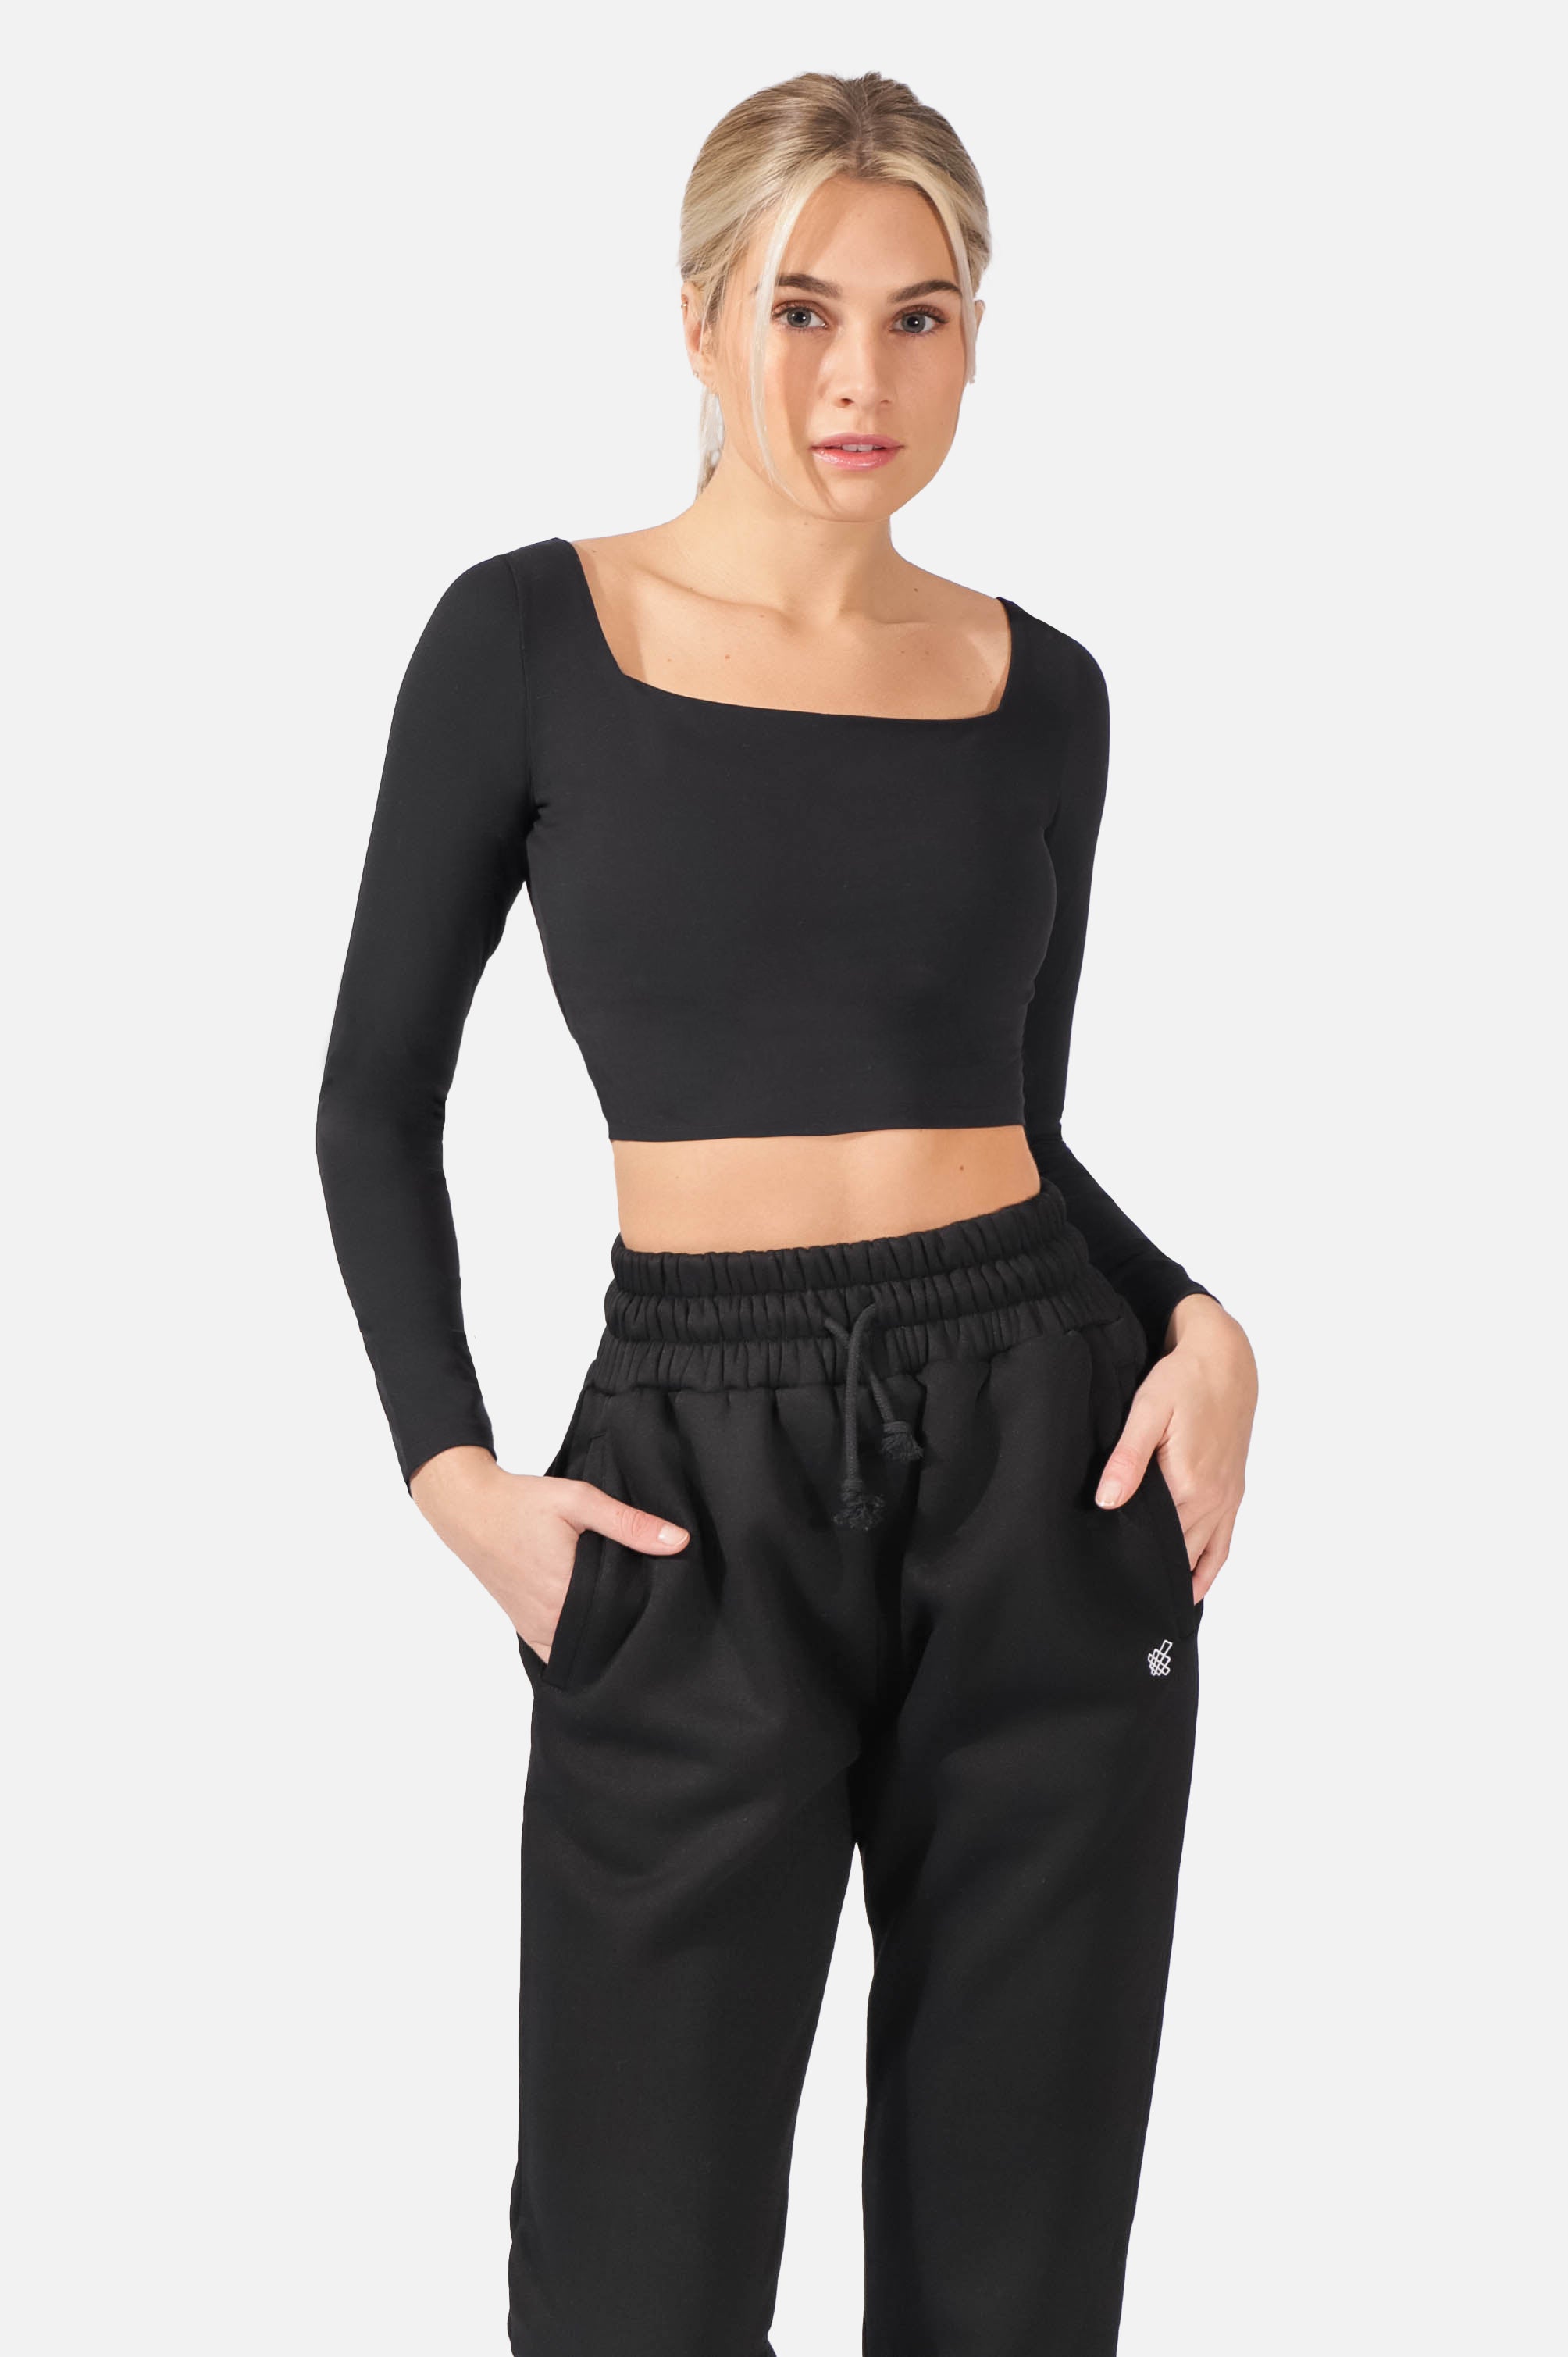 size XL] black square neck short sleeve crop top with built in bra, Women's  Fashion, Tops, Shirts on Carousell